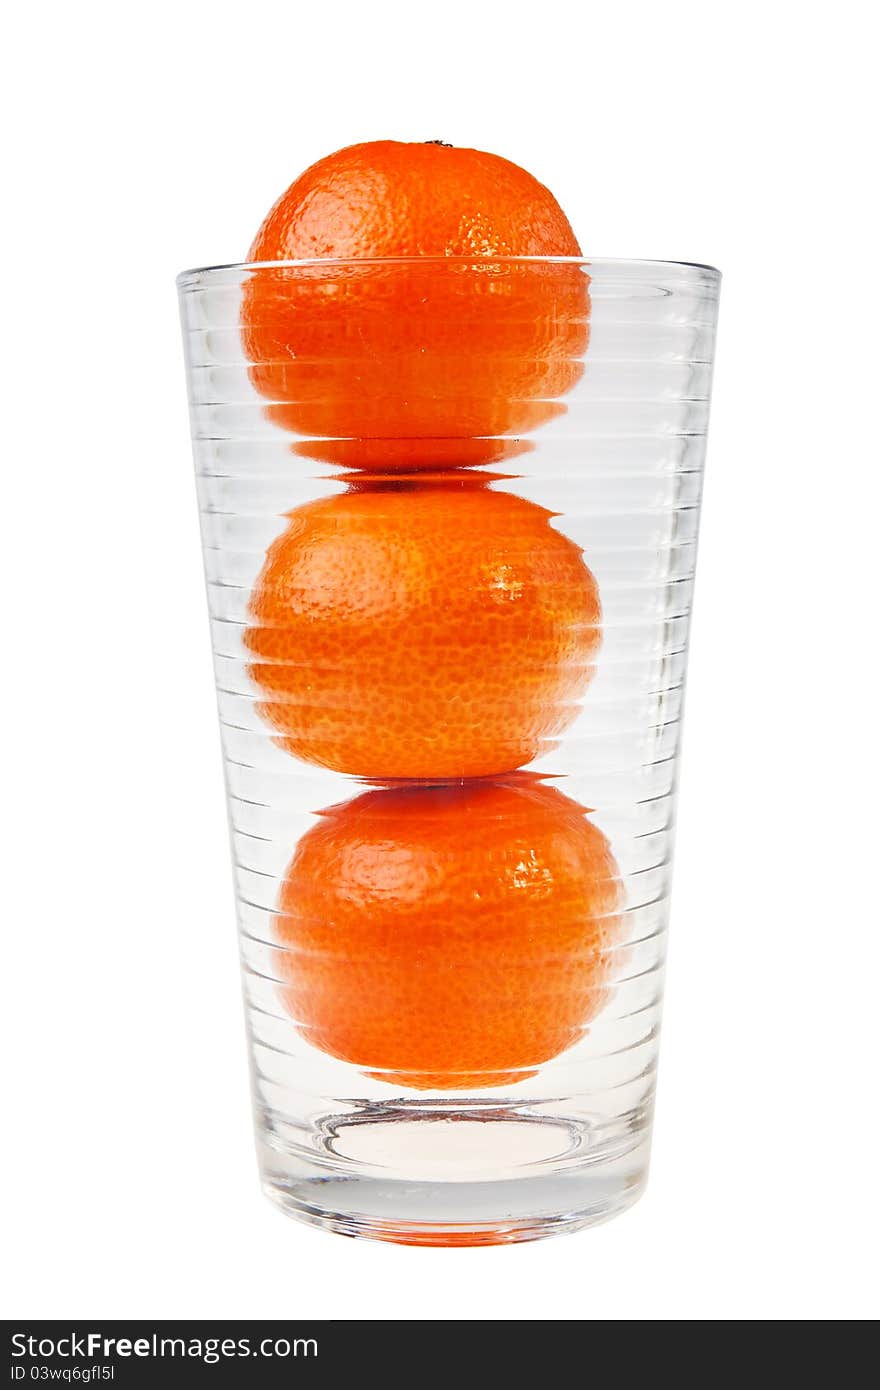 Three mandarin fruits stacked in glass over white background. Three mandarin fruits stacked in glass over white background.